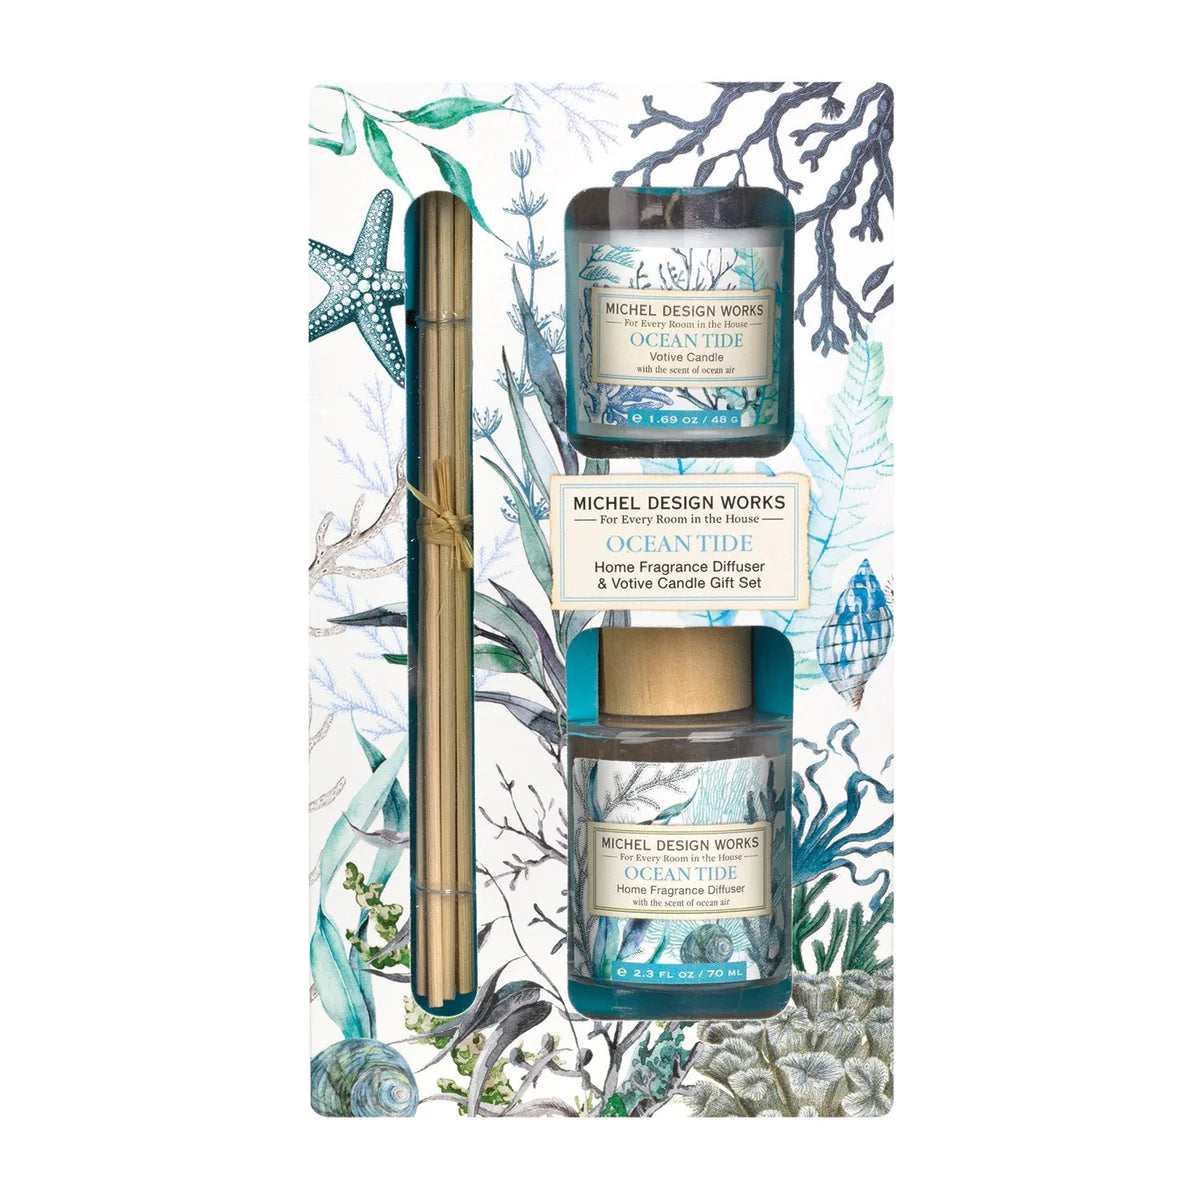 Ocean tide Home Fragrance Diffuser & Votive Candle Gift Set - Zinnias Gift Boutique